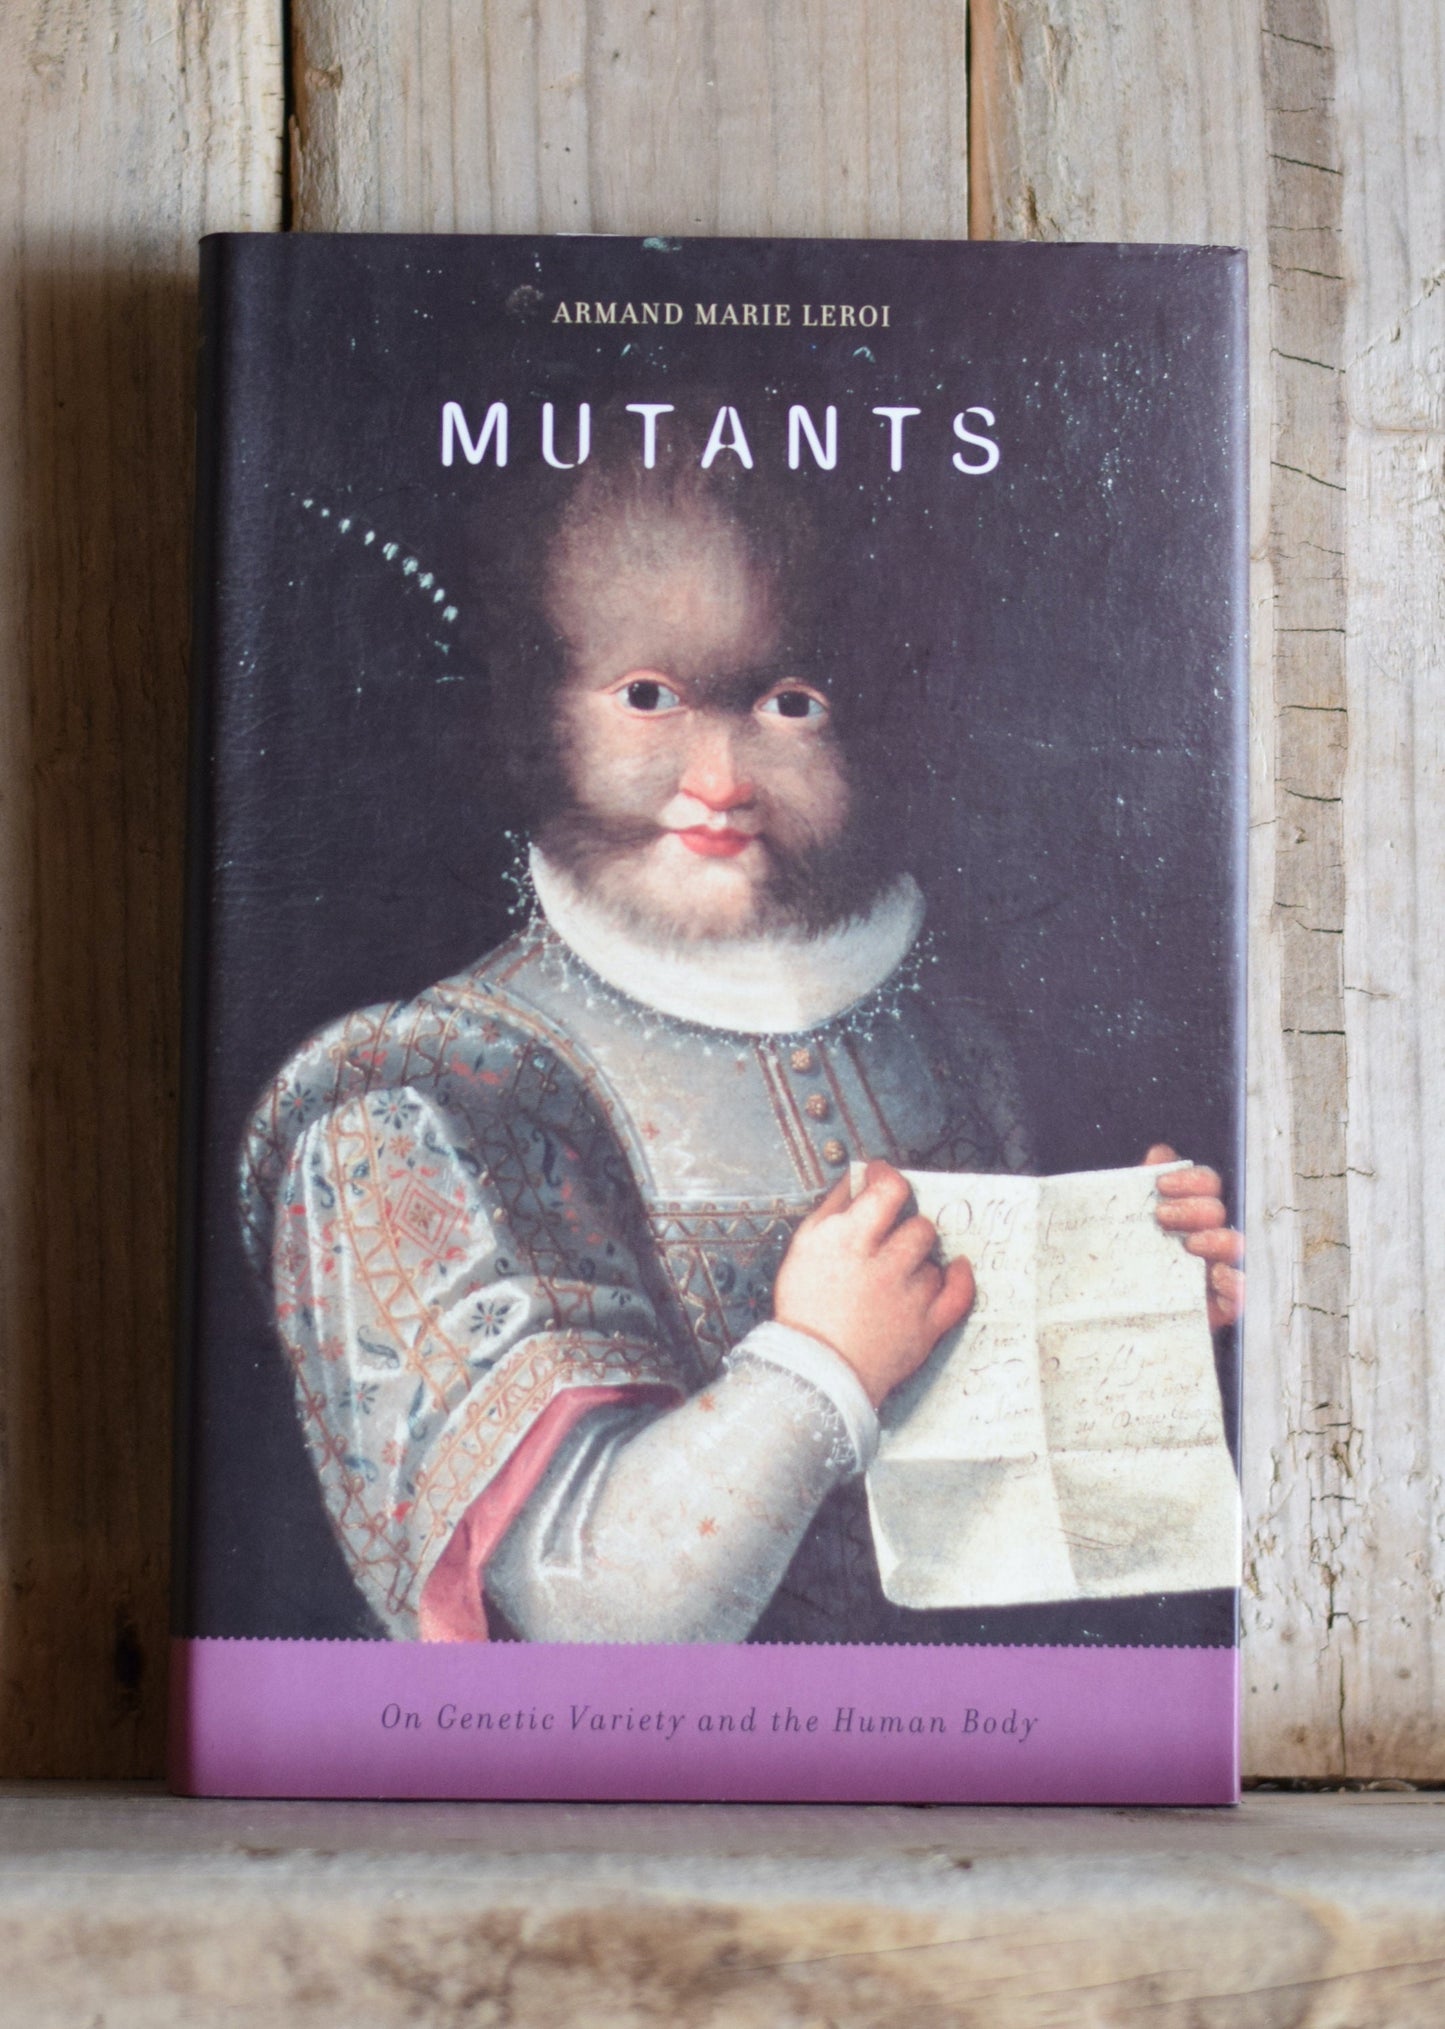 Vintage Non-Fiction Hardback: Armand Marie Leroi - Mutants, On Genetic Variety and the Human Body FIRST EDITION/PRINTING